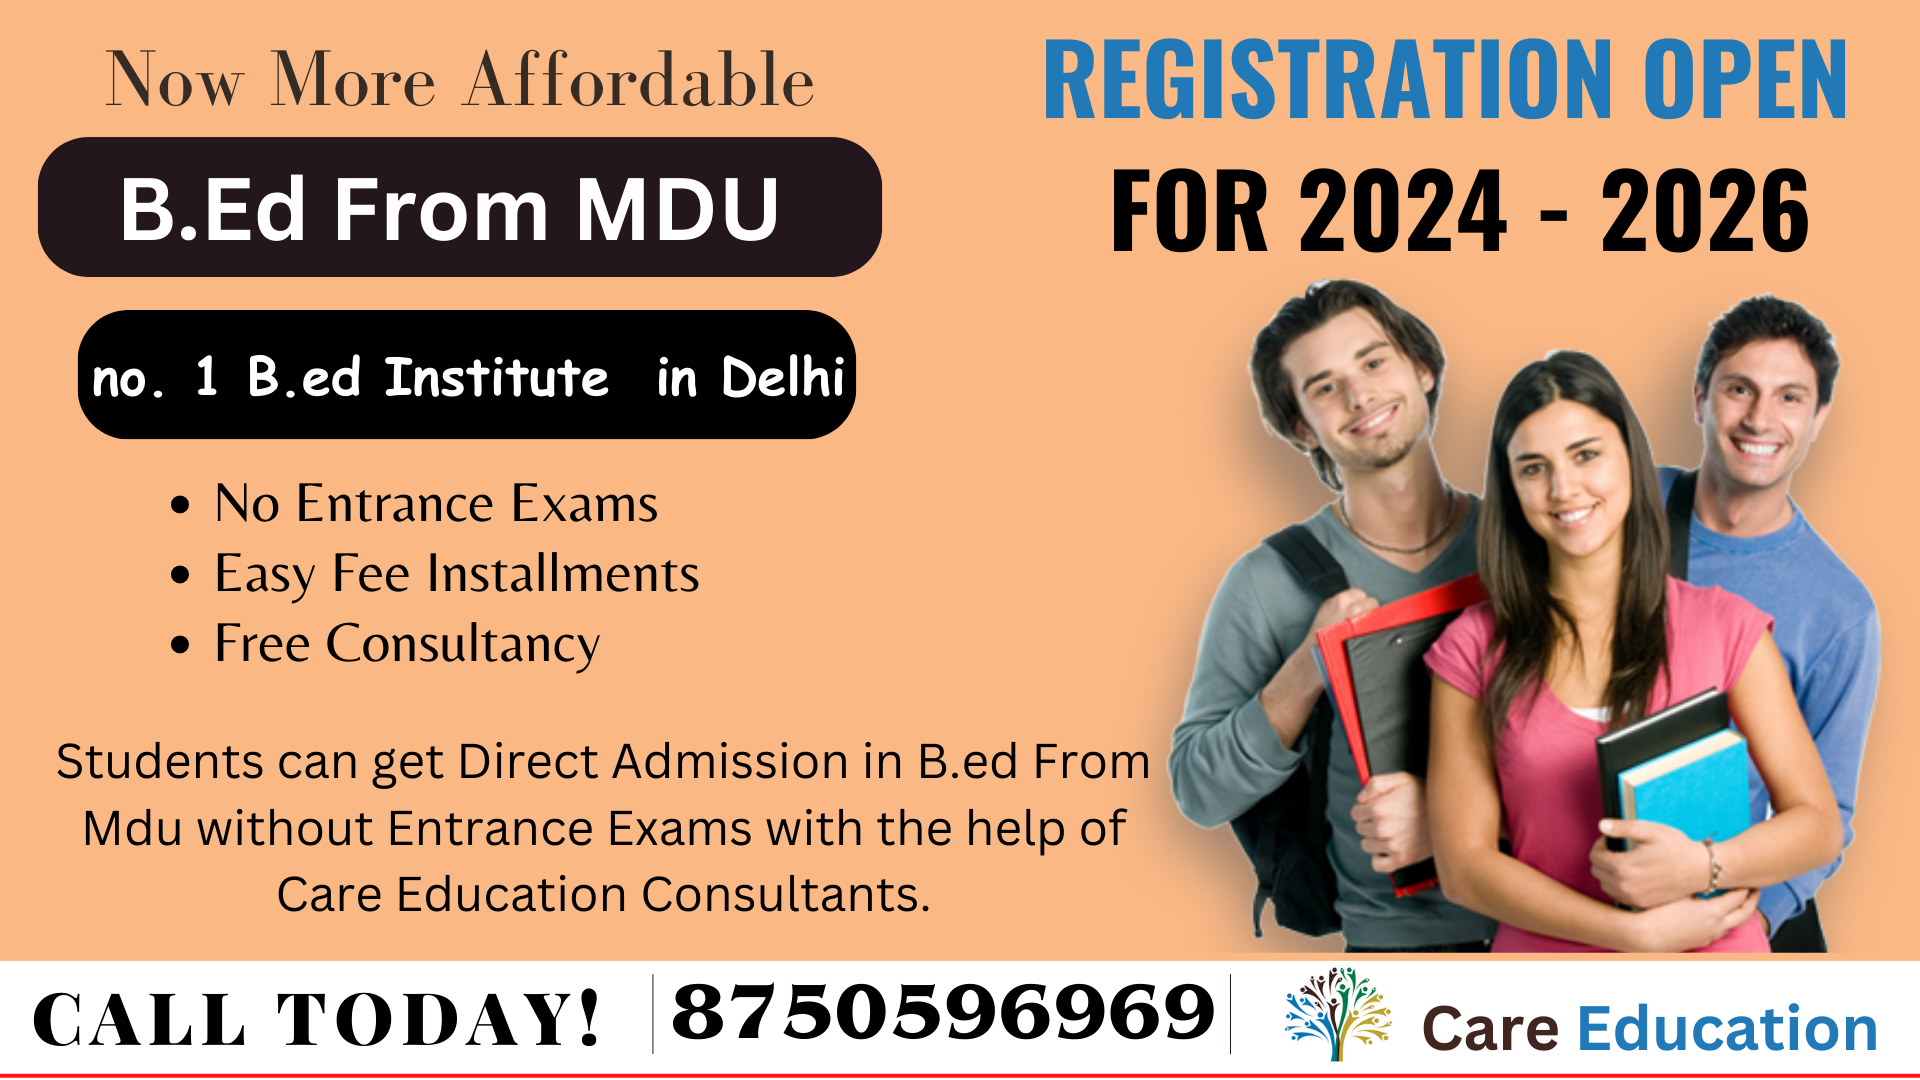 B.Ed Admission from MDU 2024